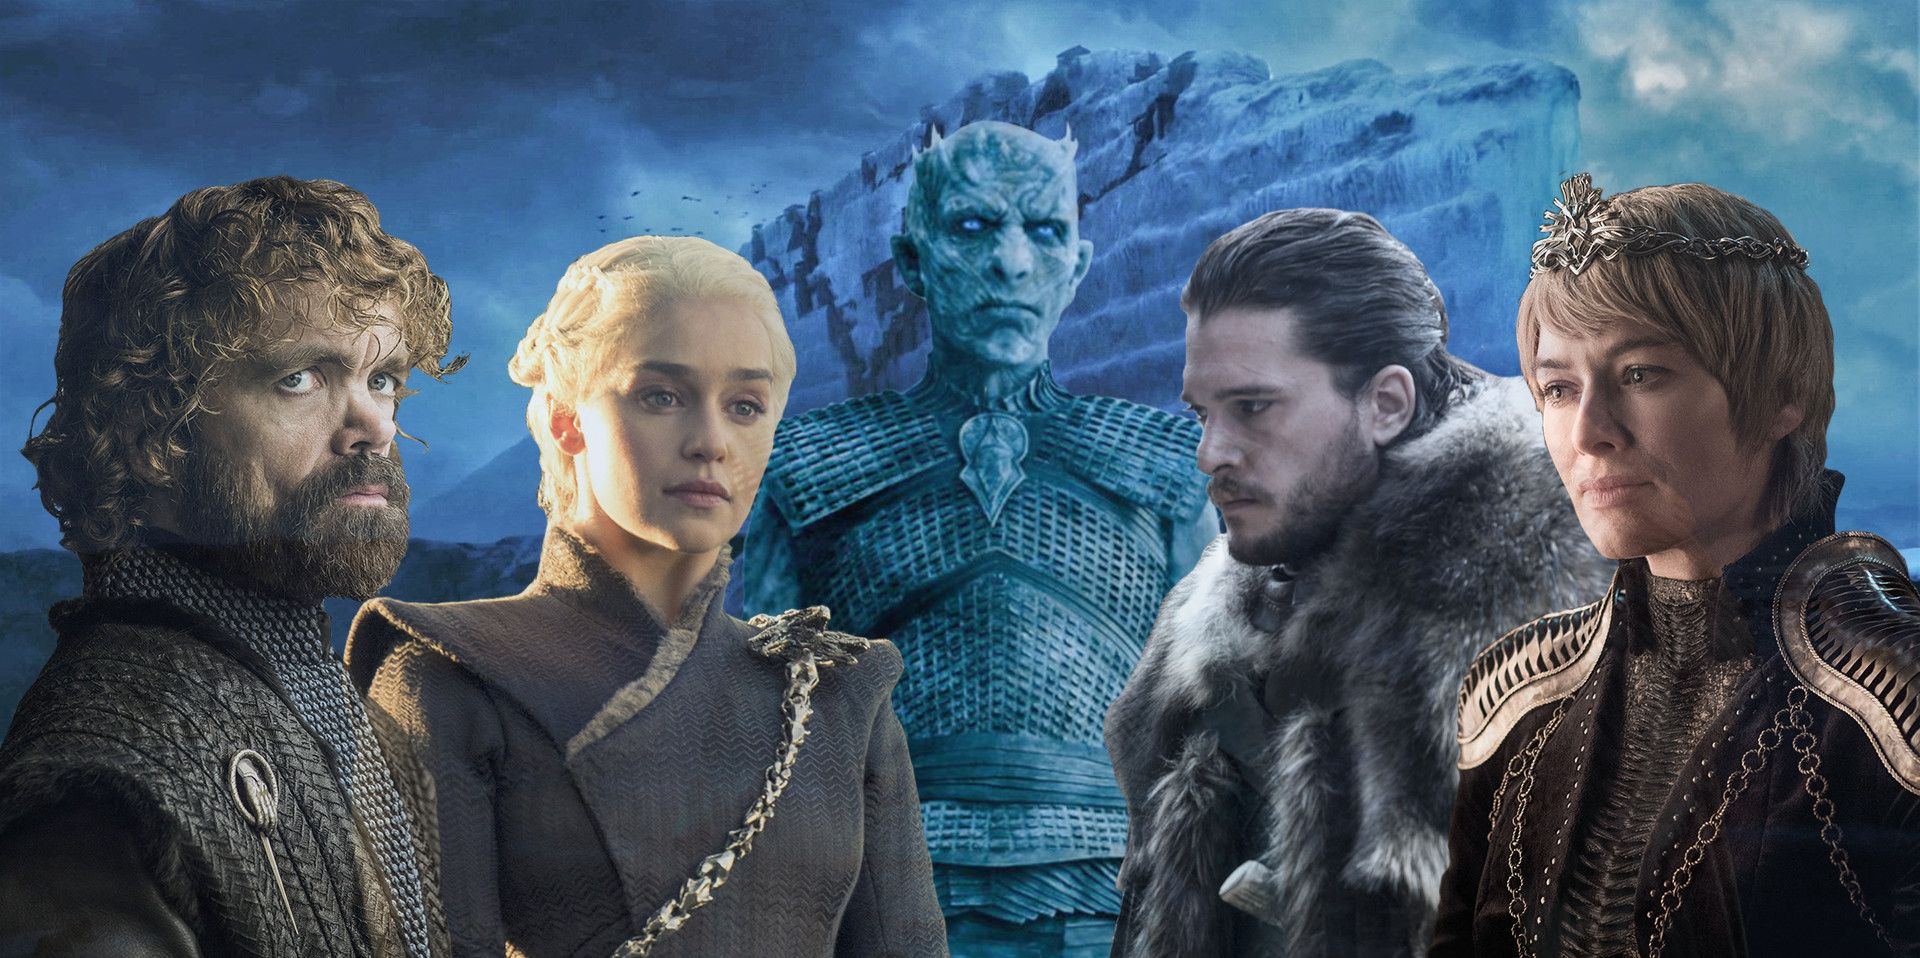 For many Game of Thrones fans, season 8 is just the first ending